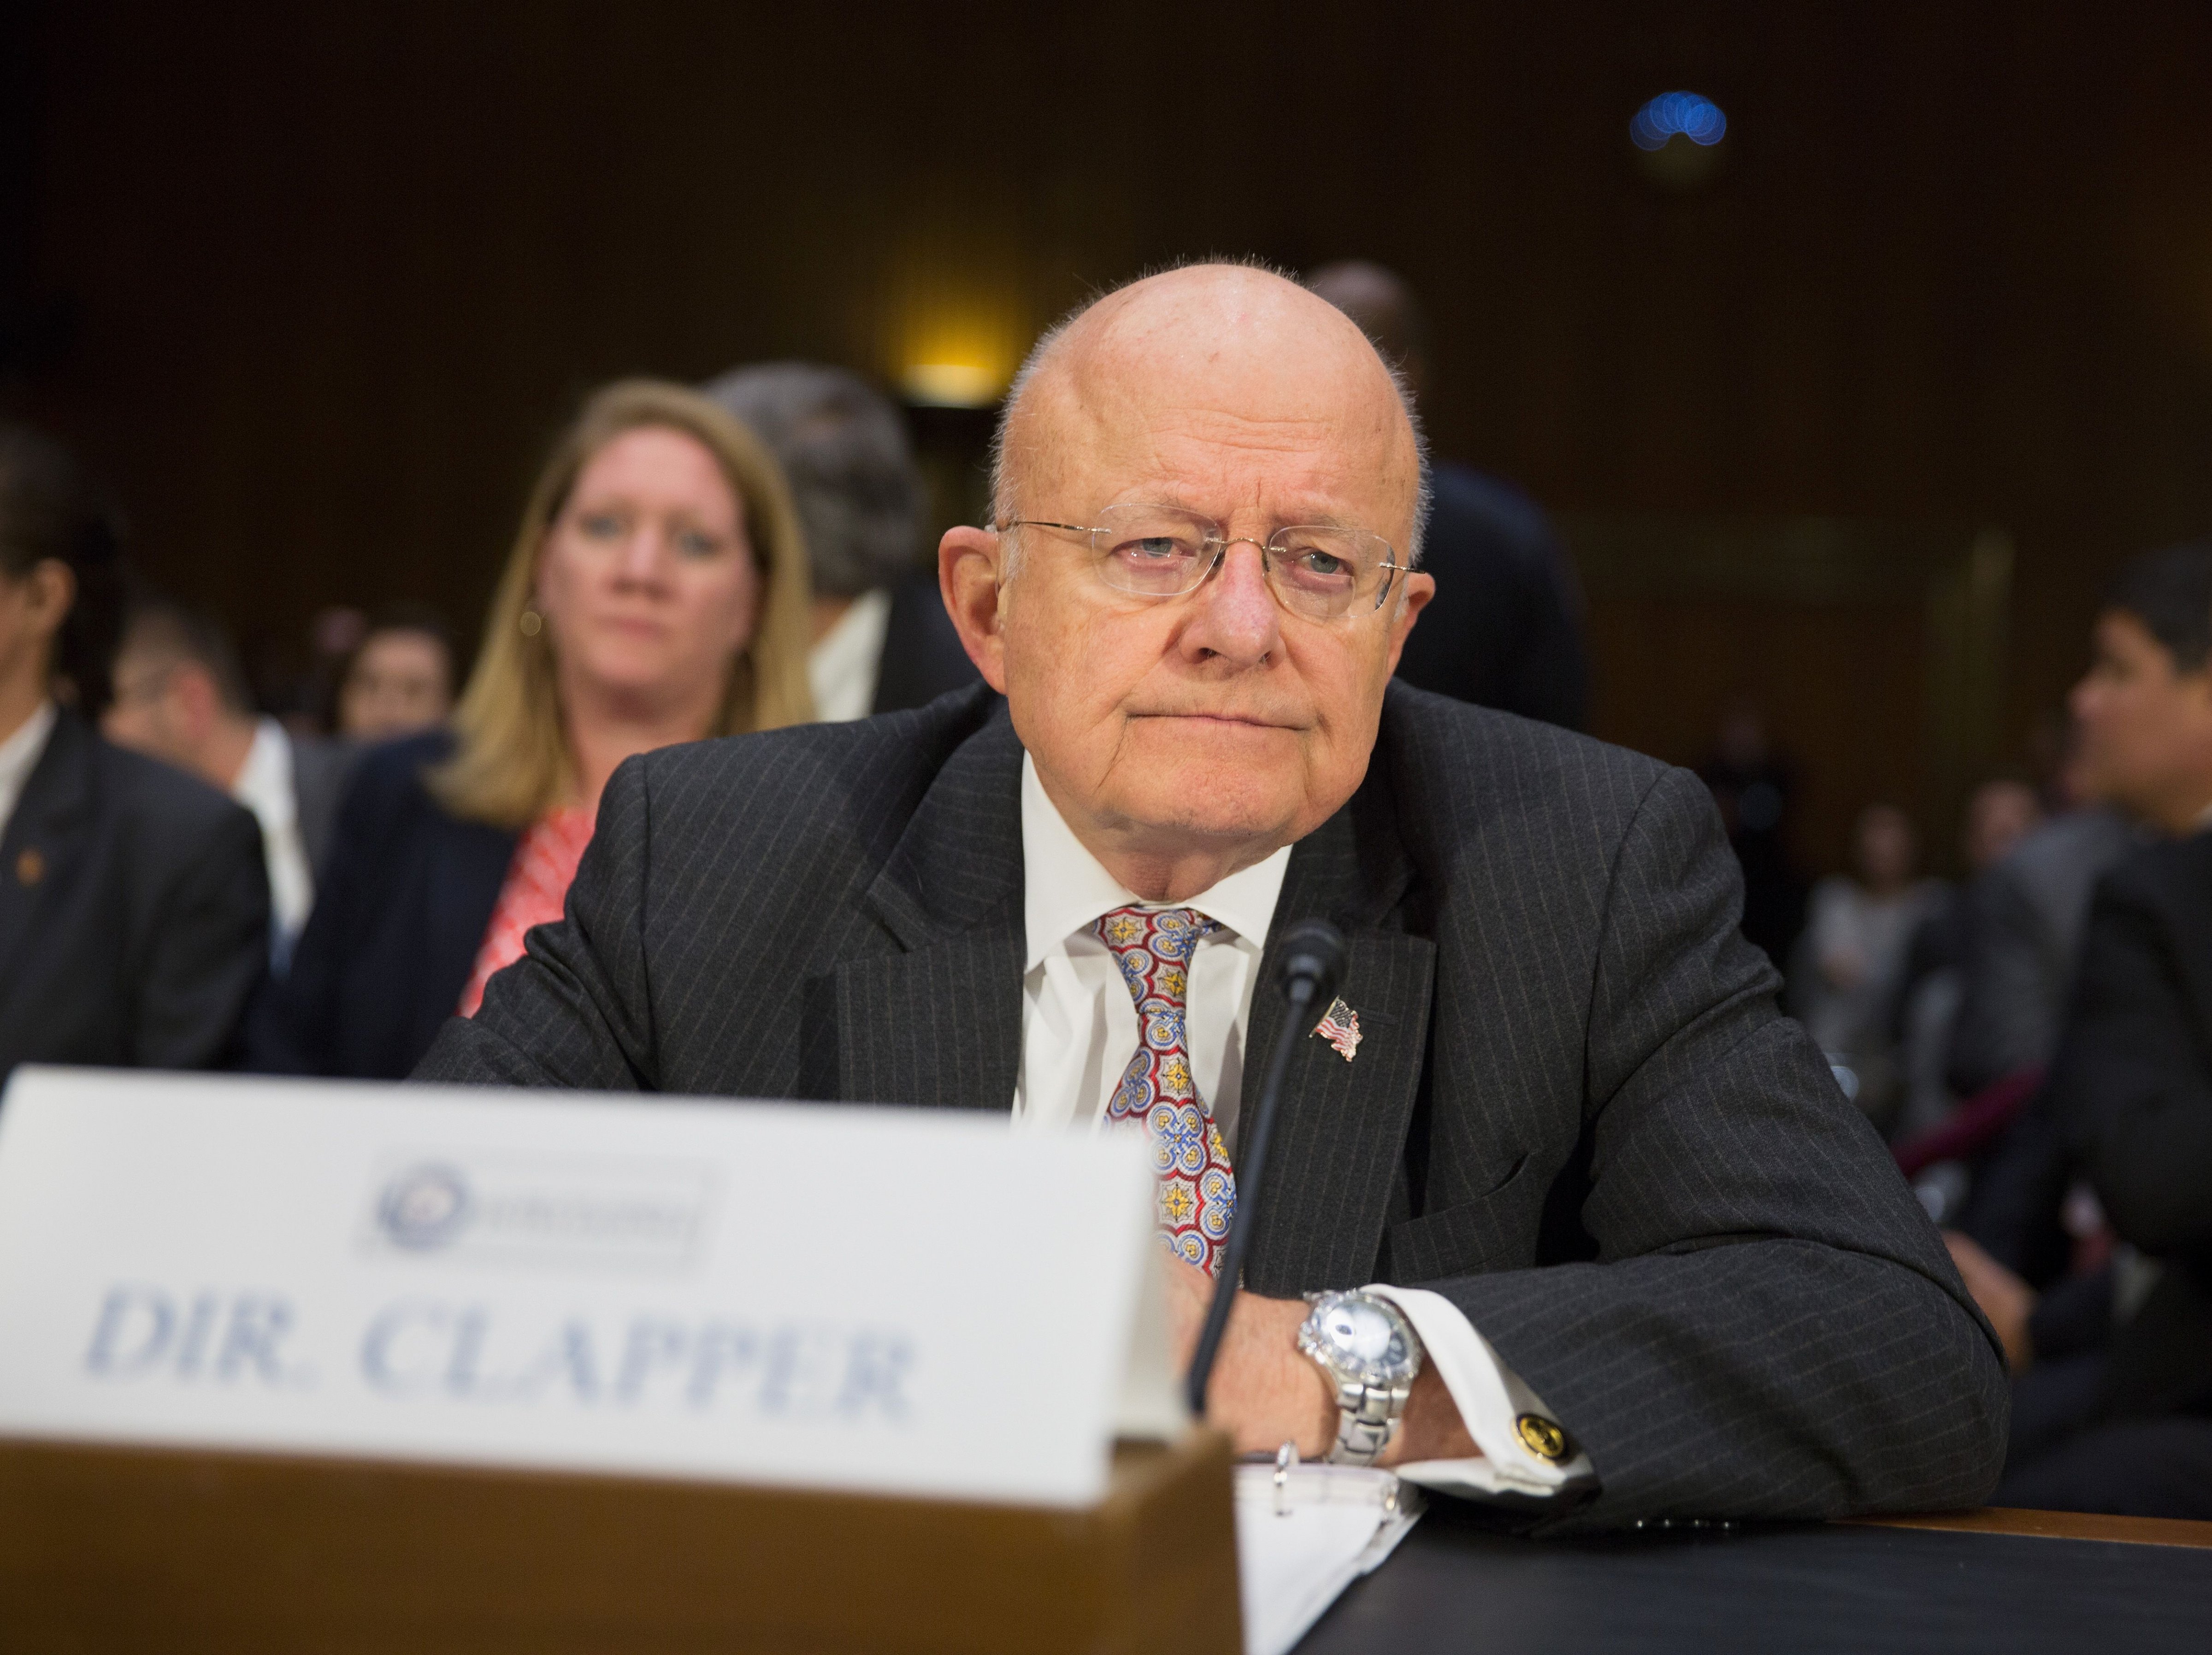 James Clapper, Director of National Intelligence, testifies during a Senate Armed Services Committee hearing on Russian Intelligence Activities on Capitol Hill in Washington, DC Jan. 10, 2017. (Tasos Katopis—AFP/Getty Images)